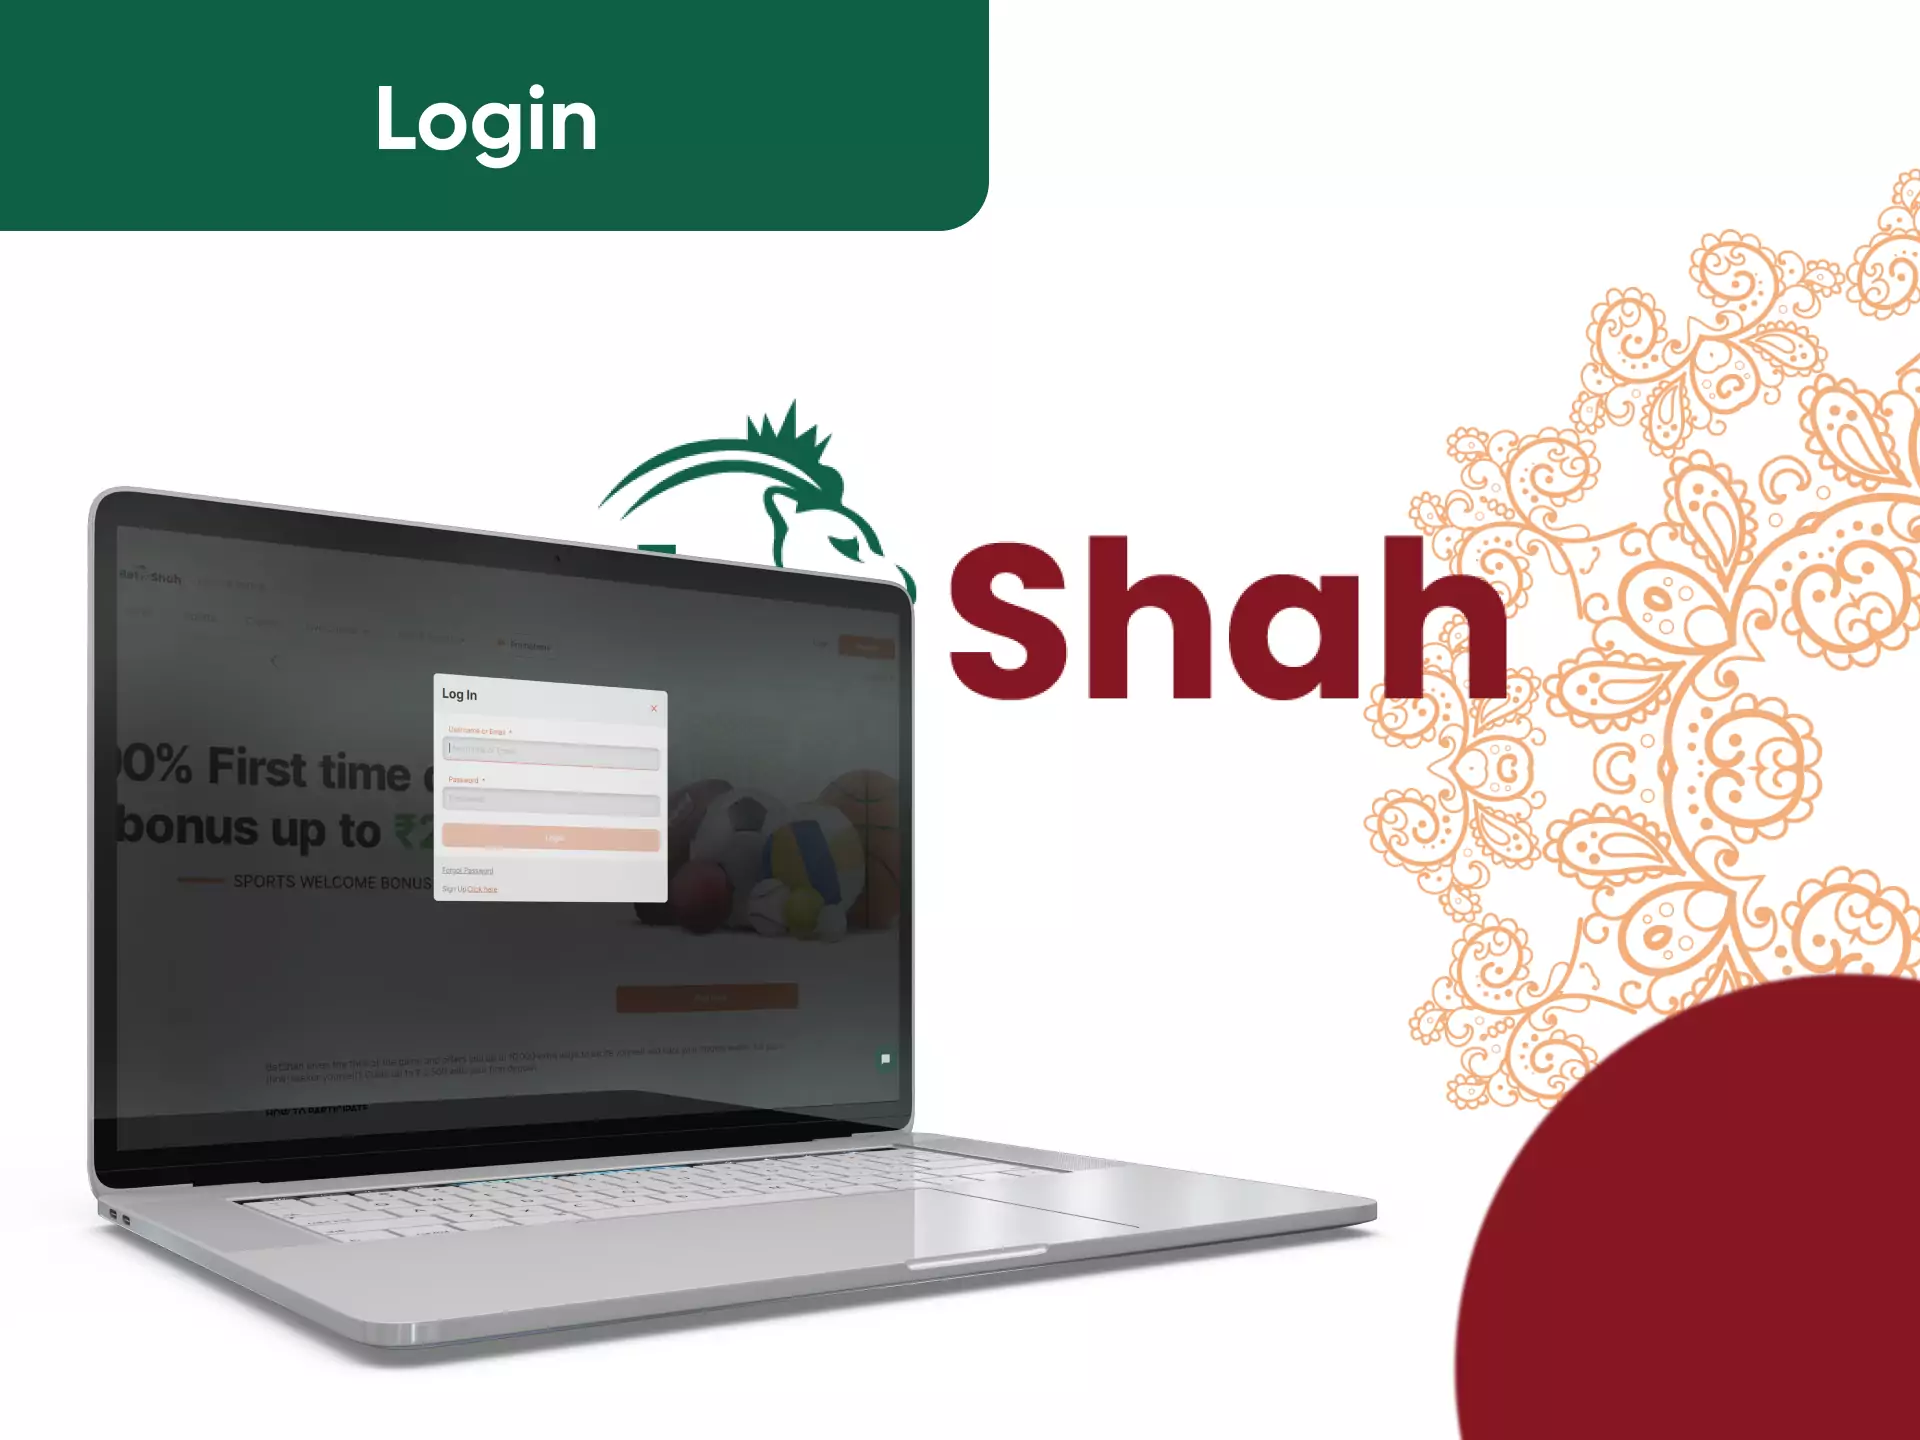 Use your ID and password to log into the Betshah account.